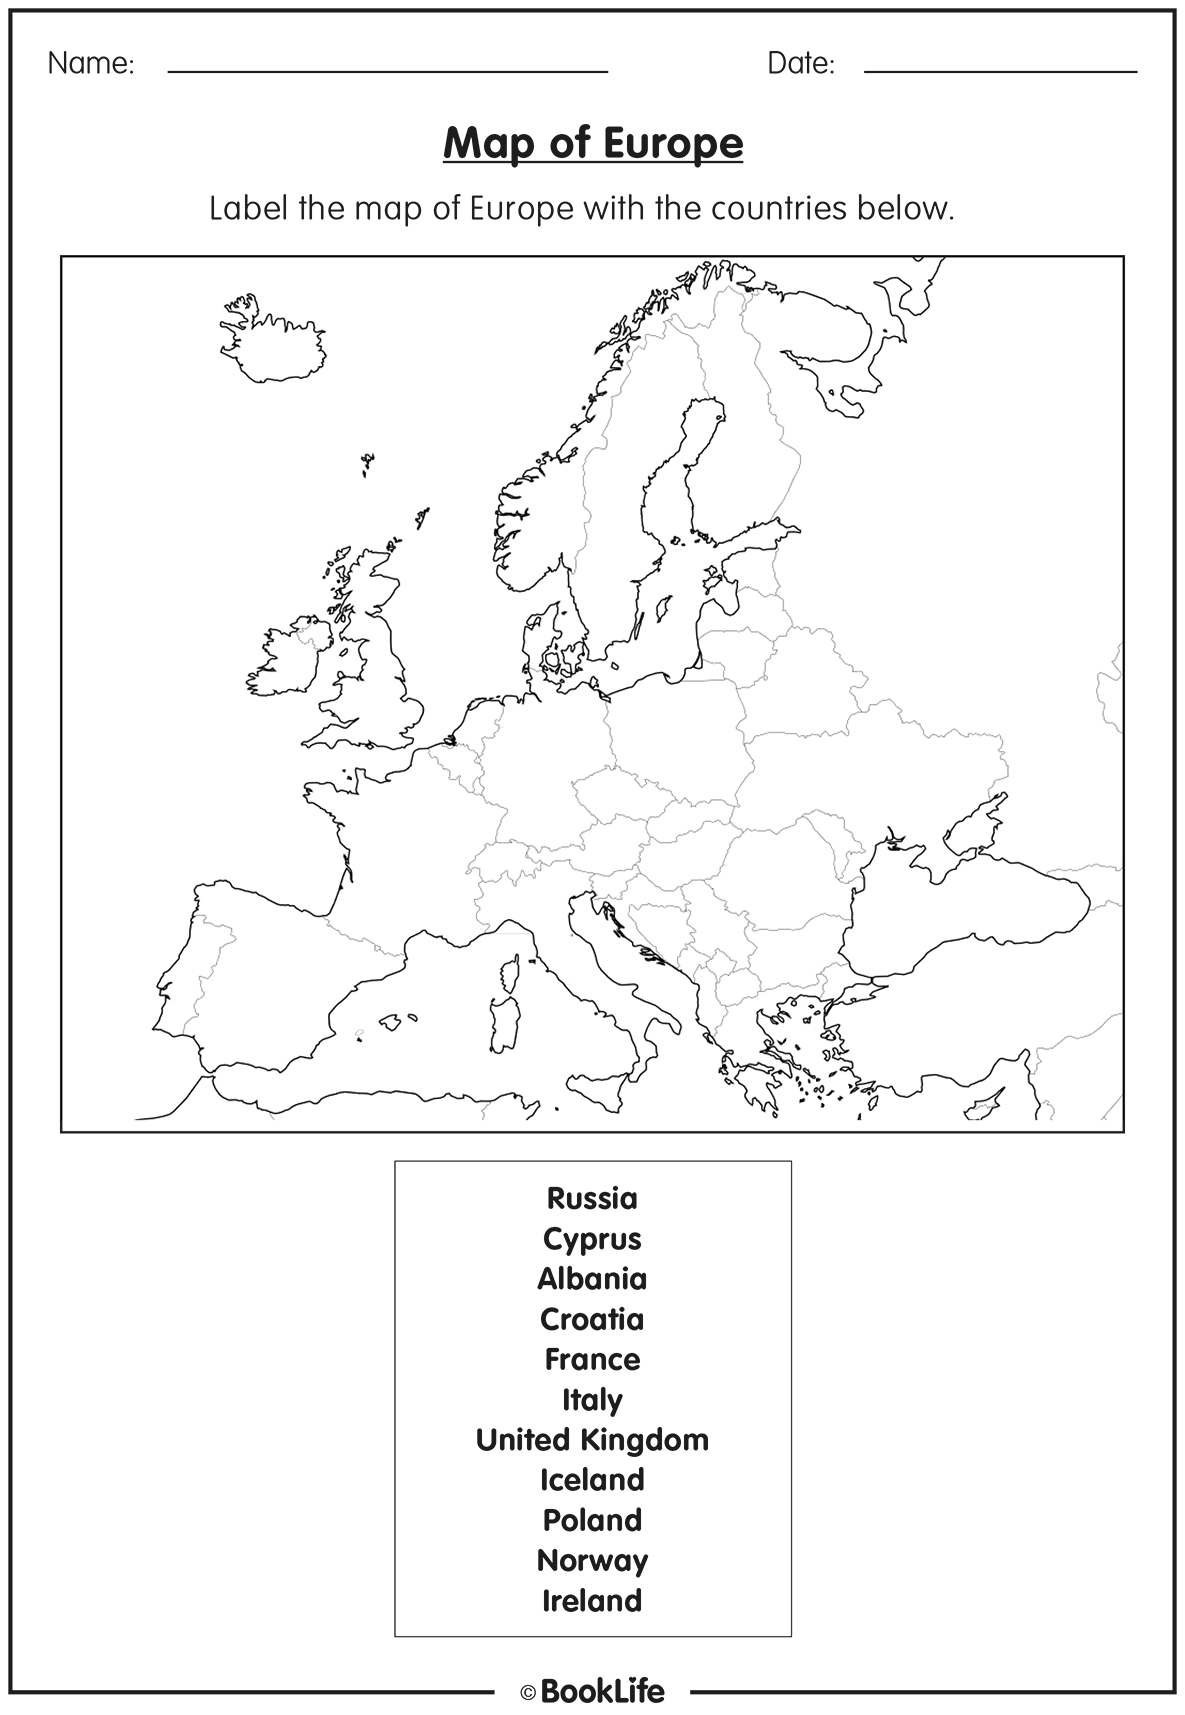 Map of Europe by BookLife